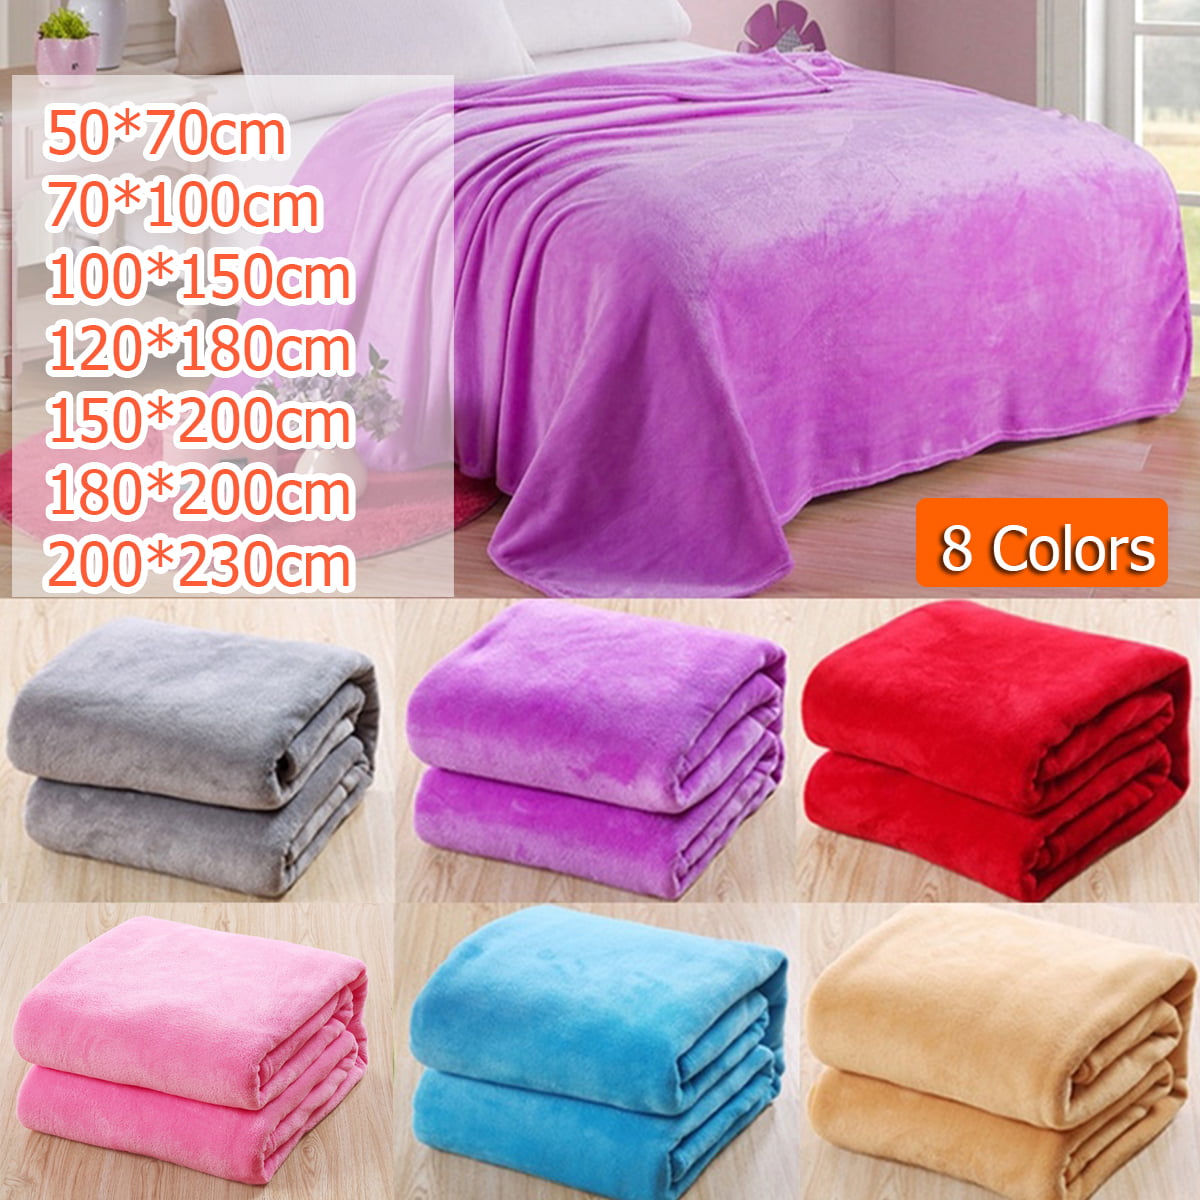 Coral Blankets Multi-color Large Blanket Throw for Soft Bed Sofa Blankets Throws 